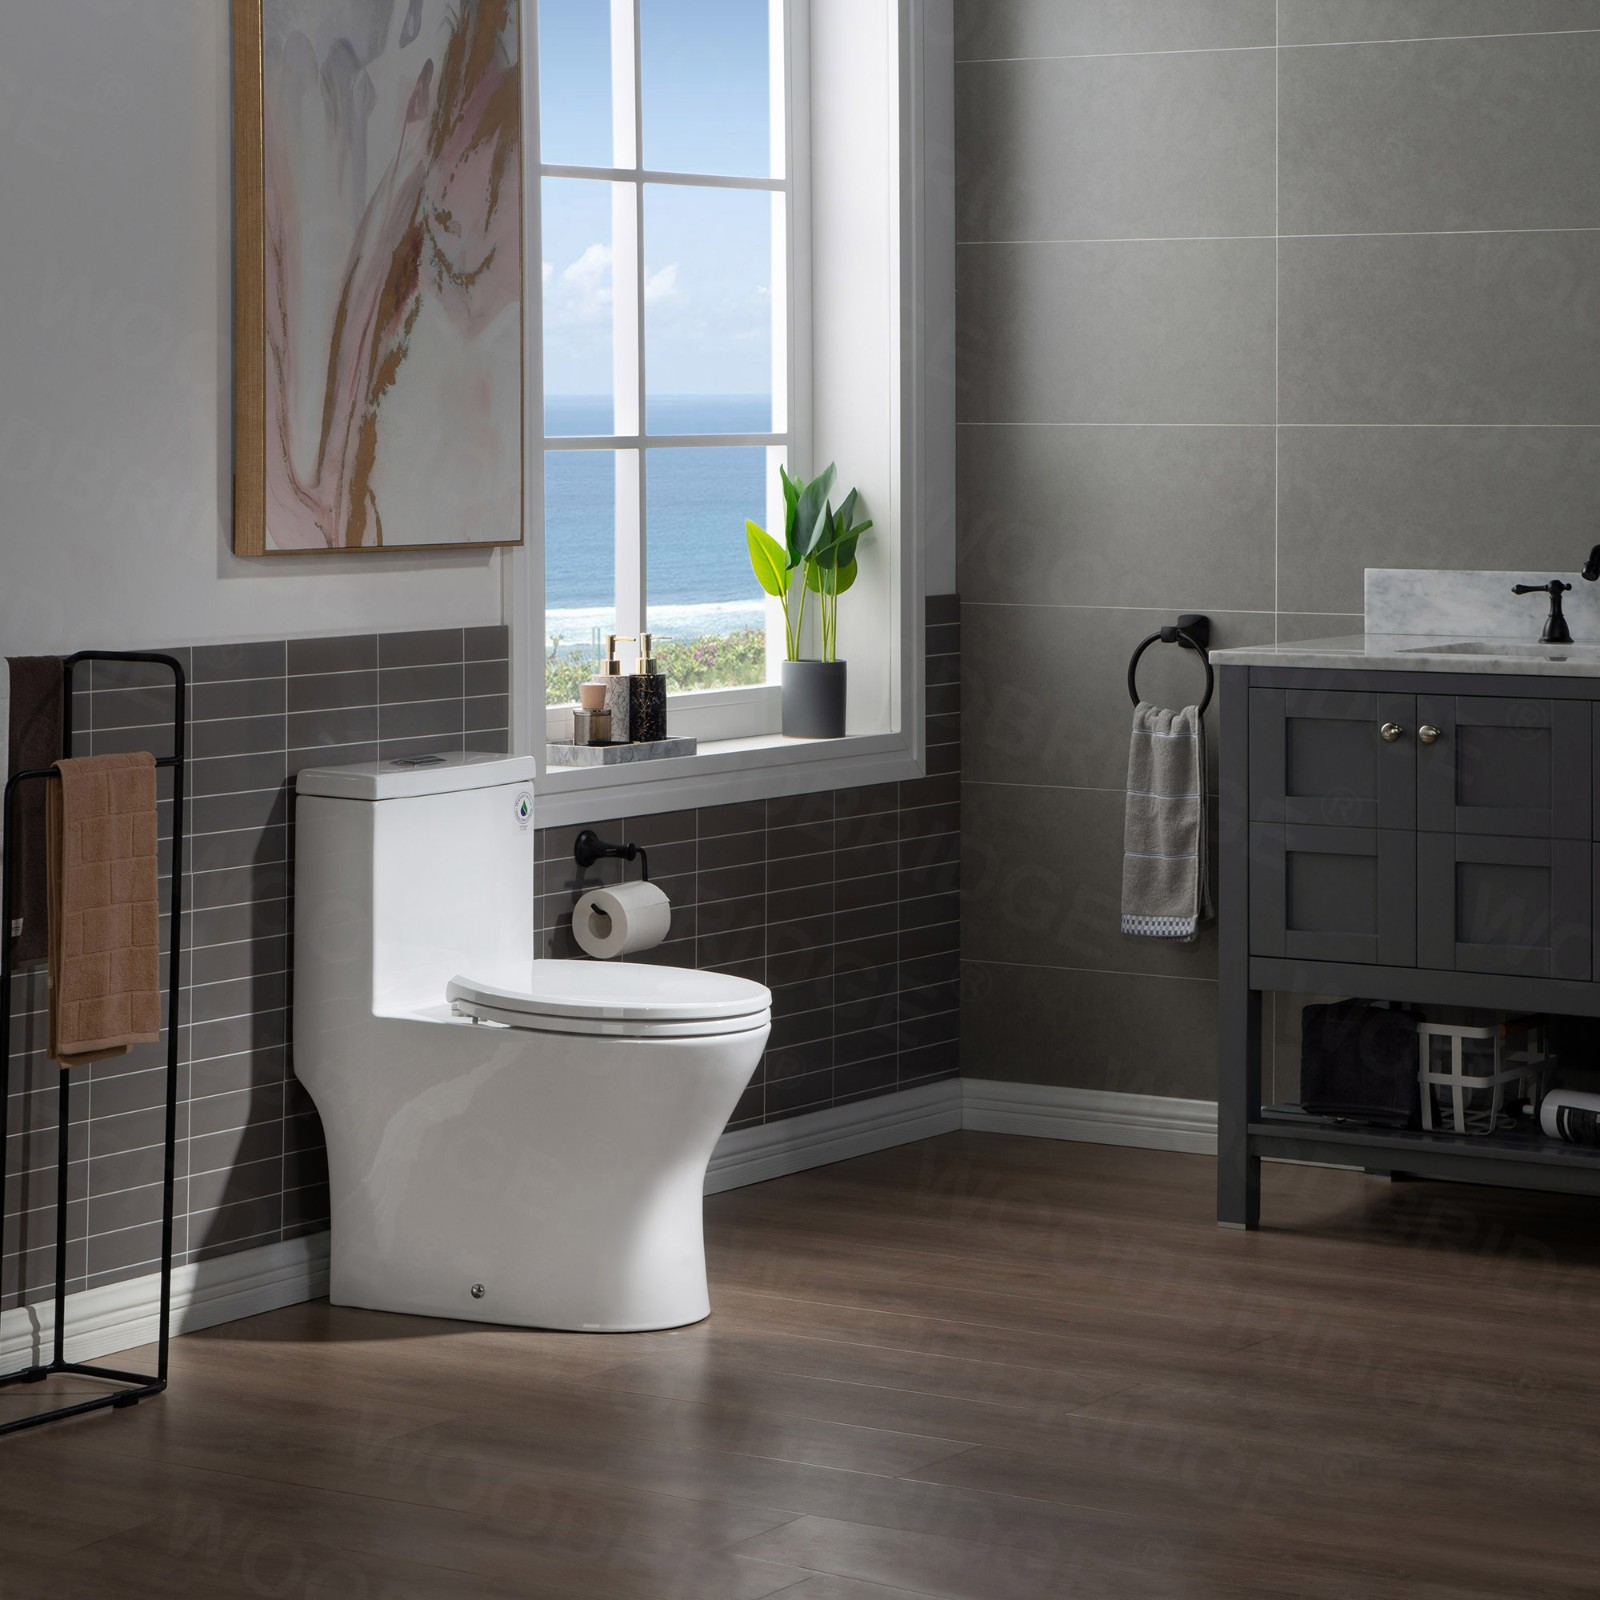  WOODBRIDGEBath T-0031 WOODBRIDGE T-0031 Short Compact Tiny One Piece Toilet with Soft Closing Seat, Small Toilet(2 -Pack)_6511